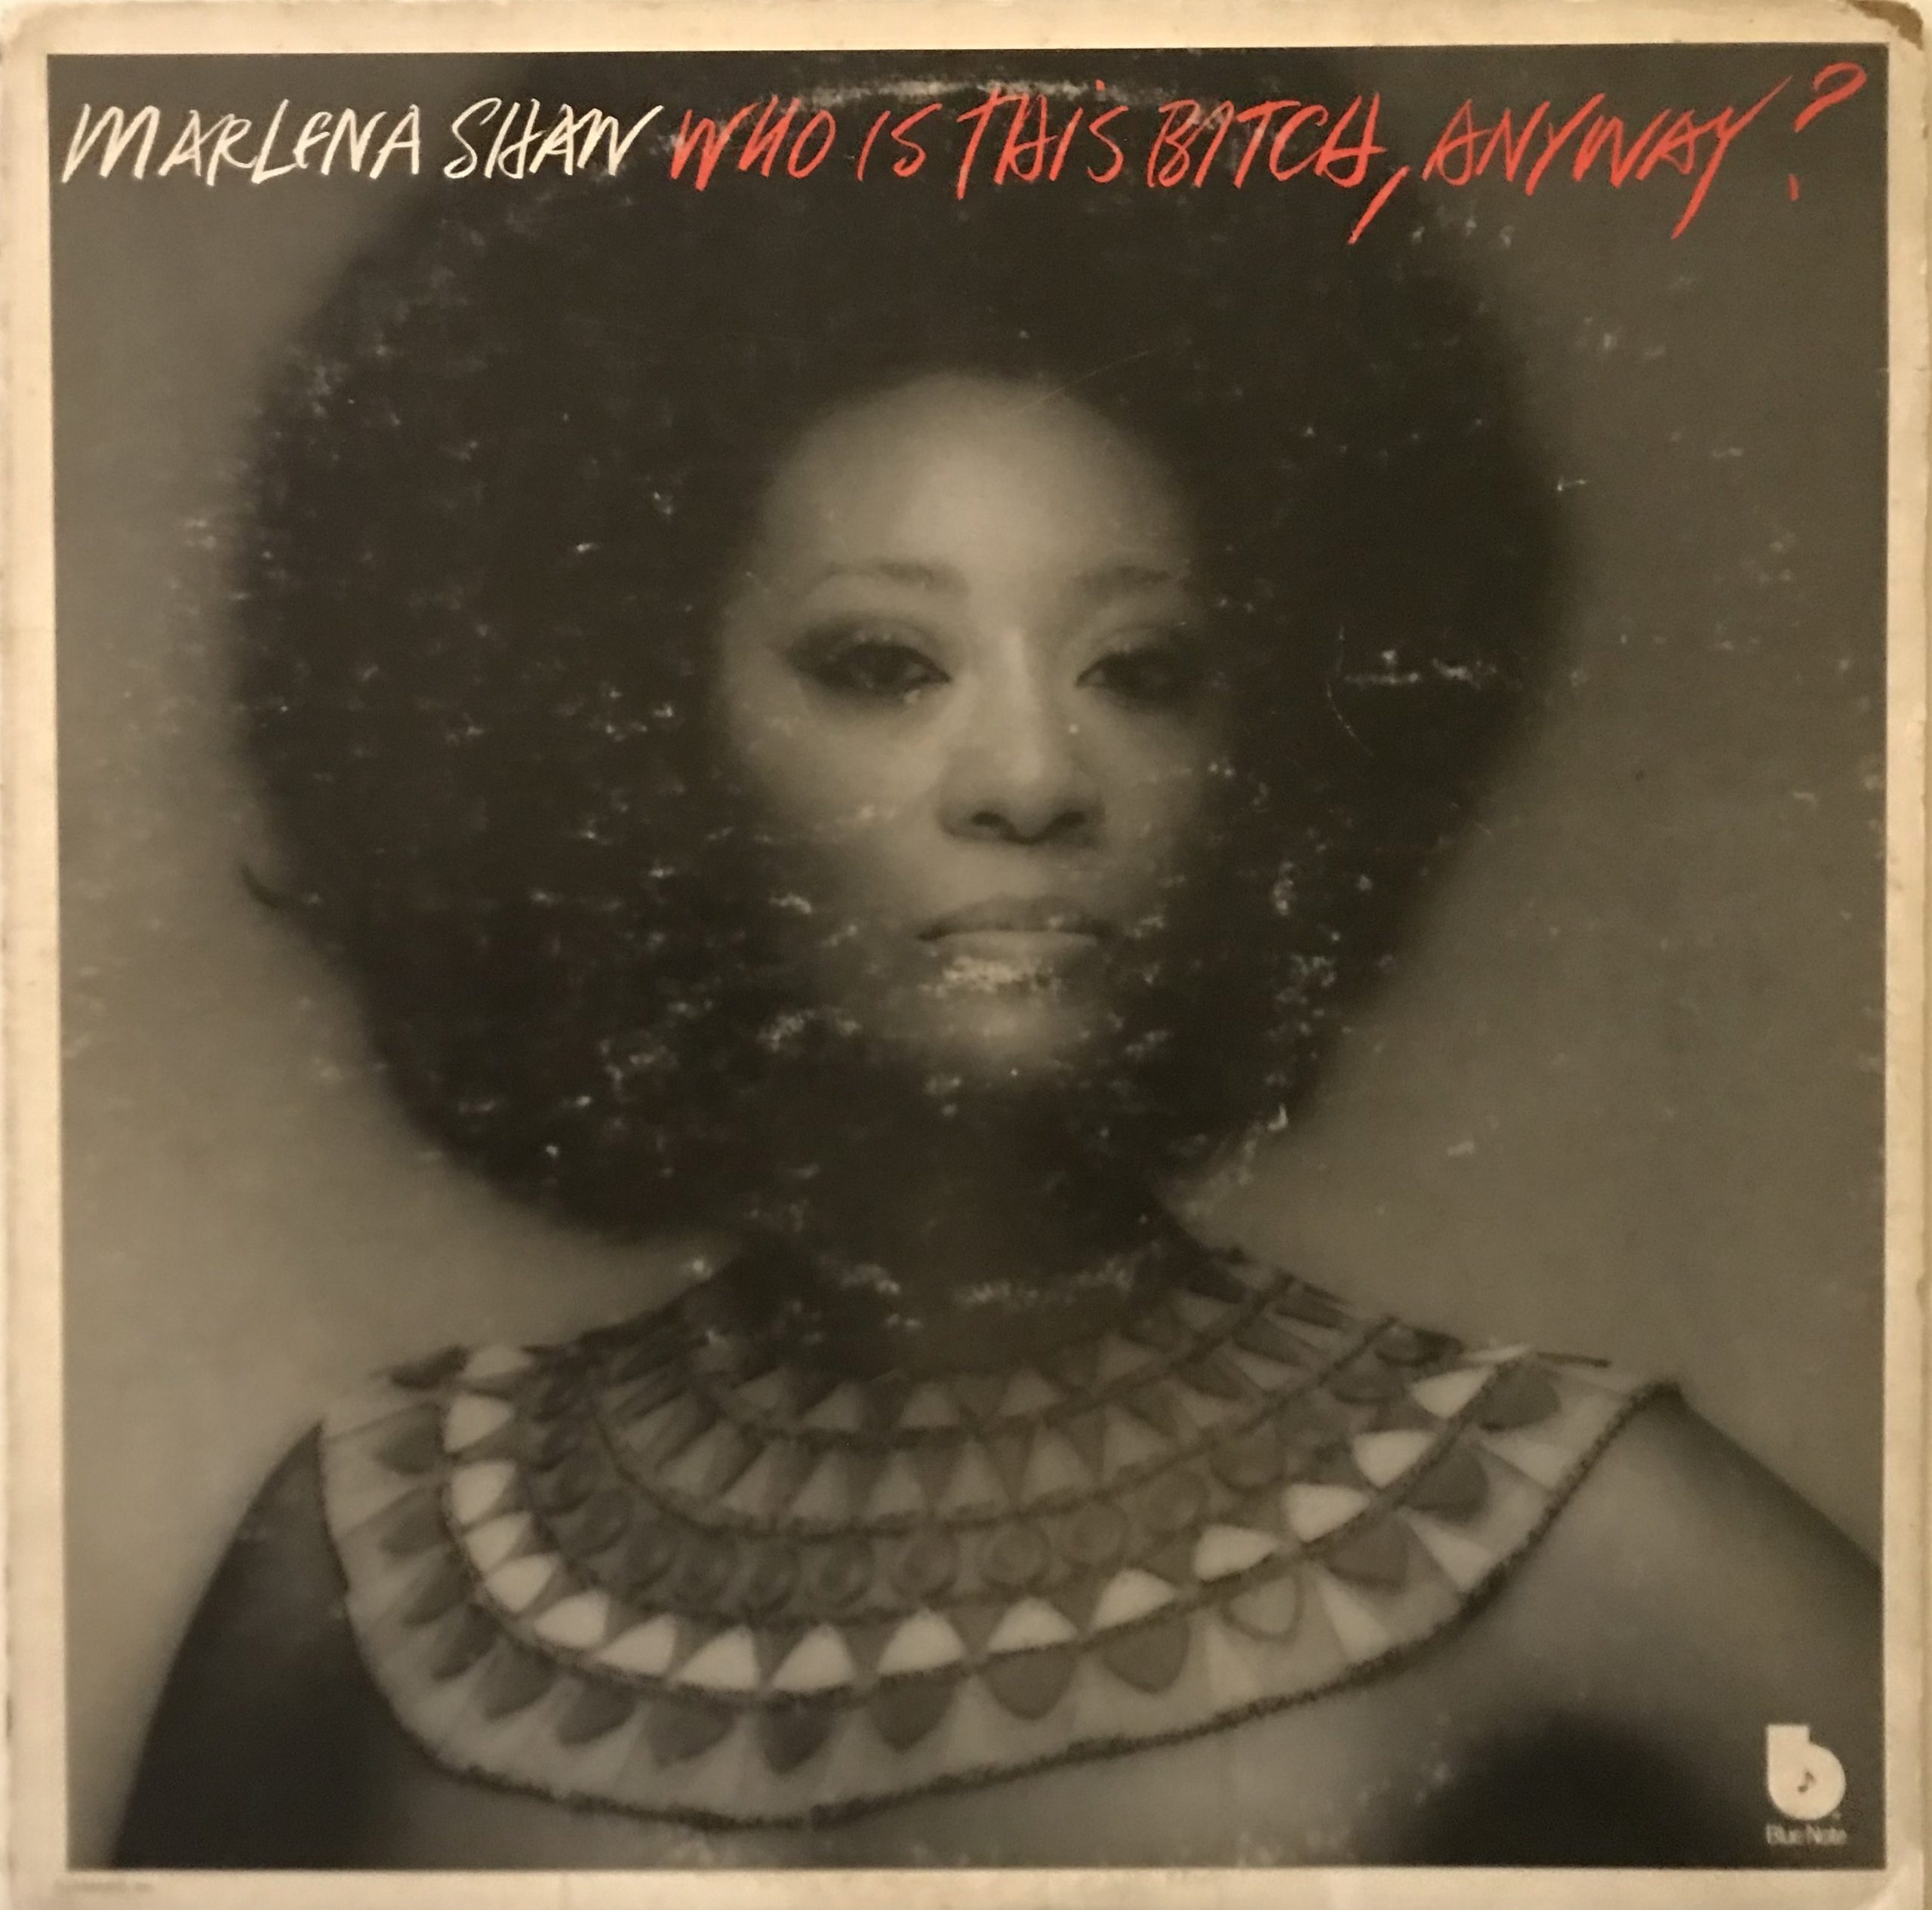 Who Is This Bitch, Anyway? - Marlena Shaw Preowned Vinyl Record